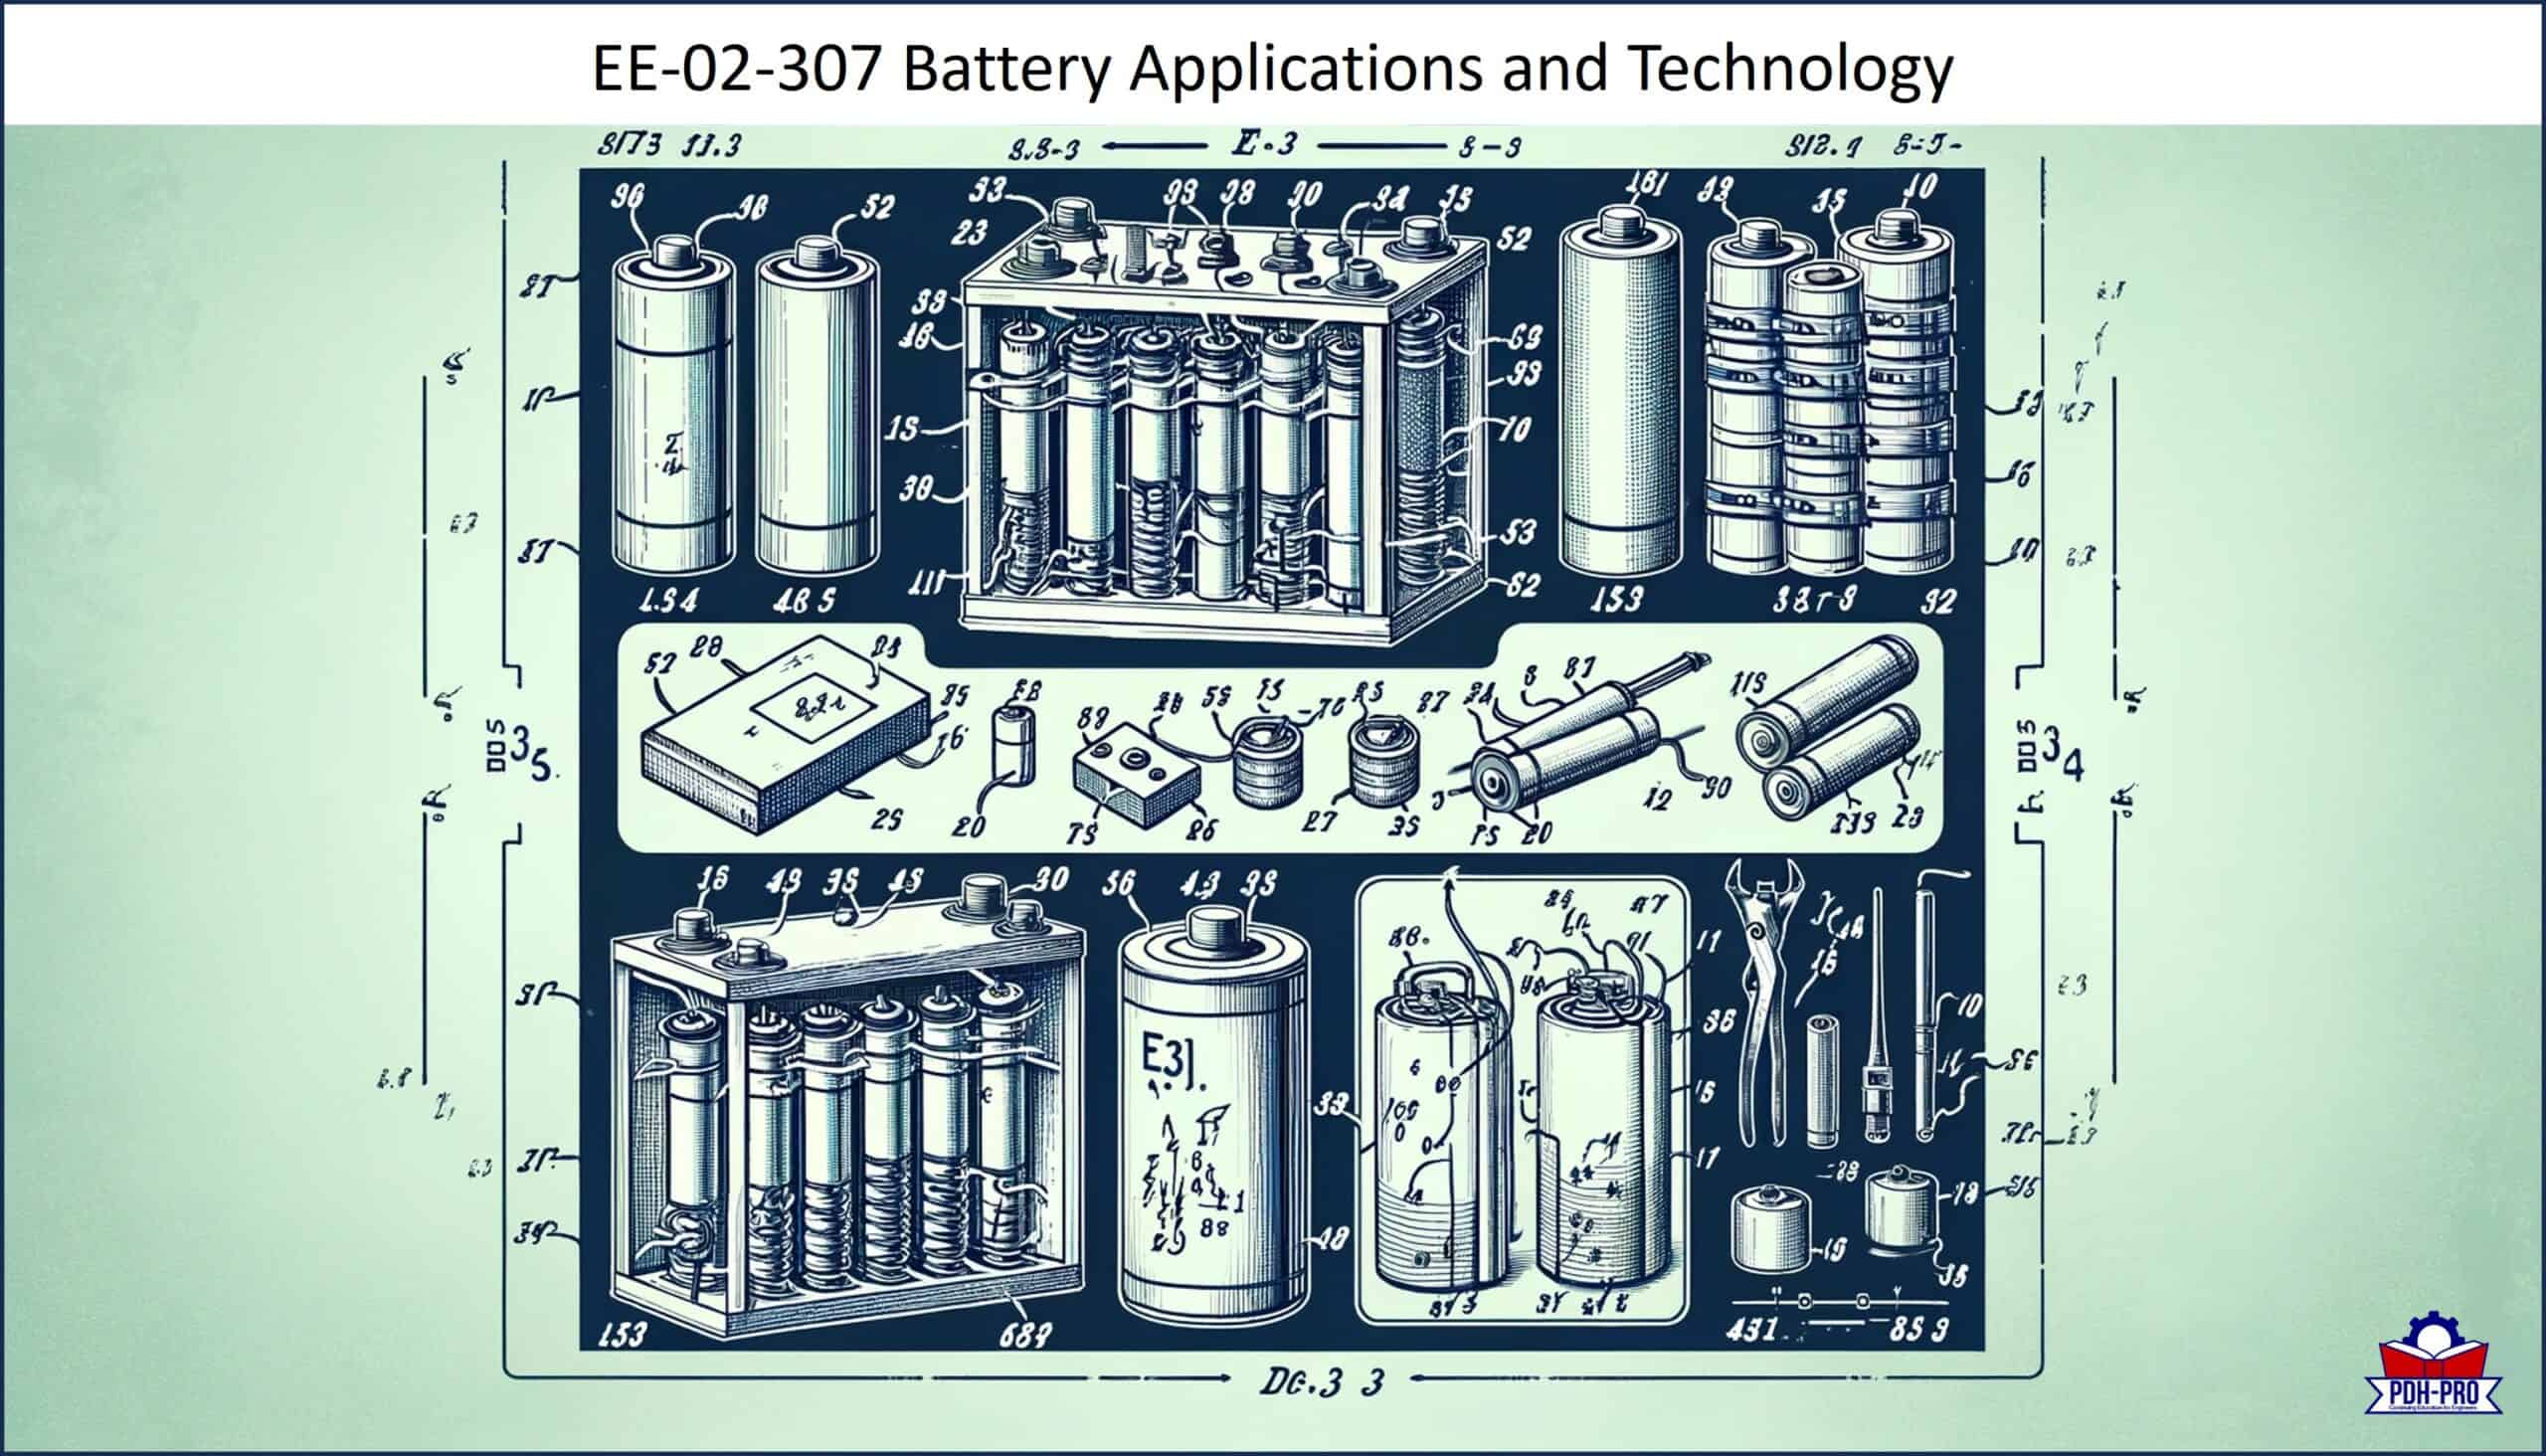 Battery Applications and Technology